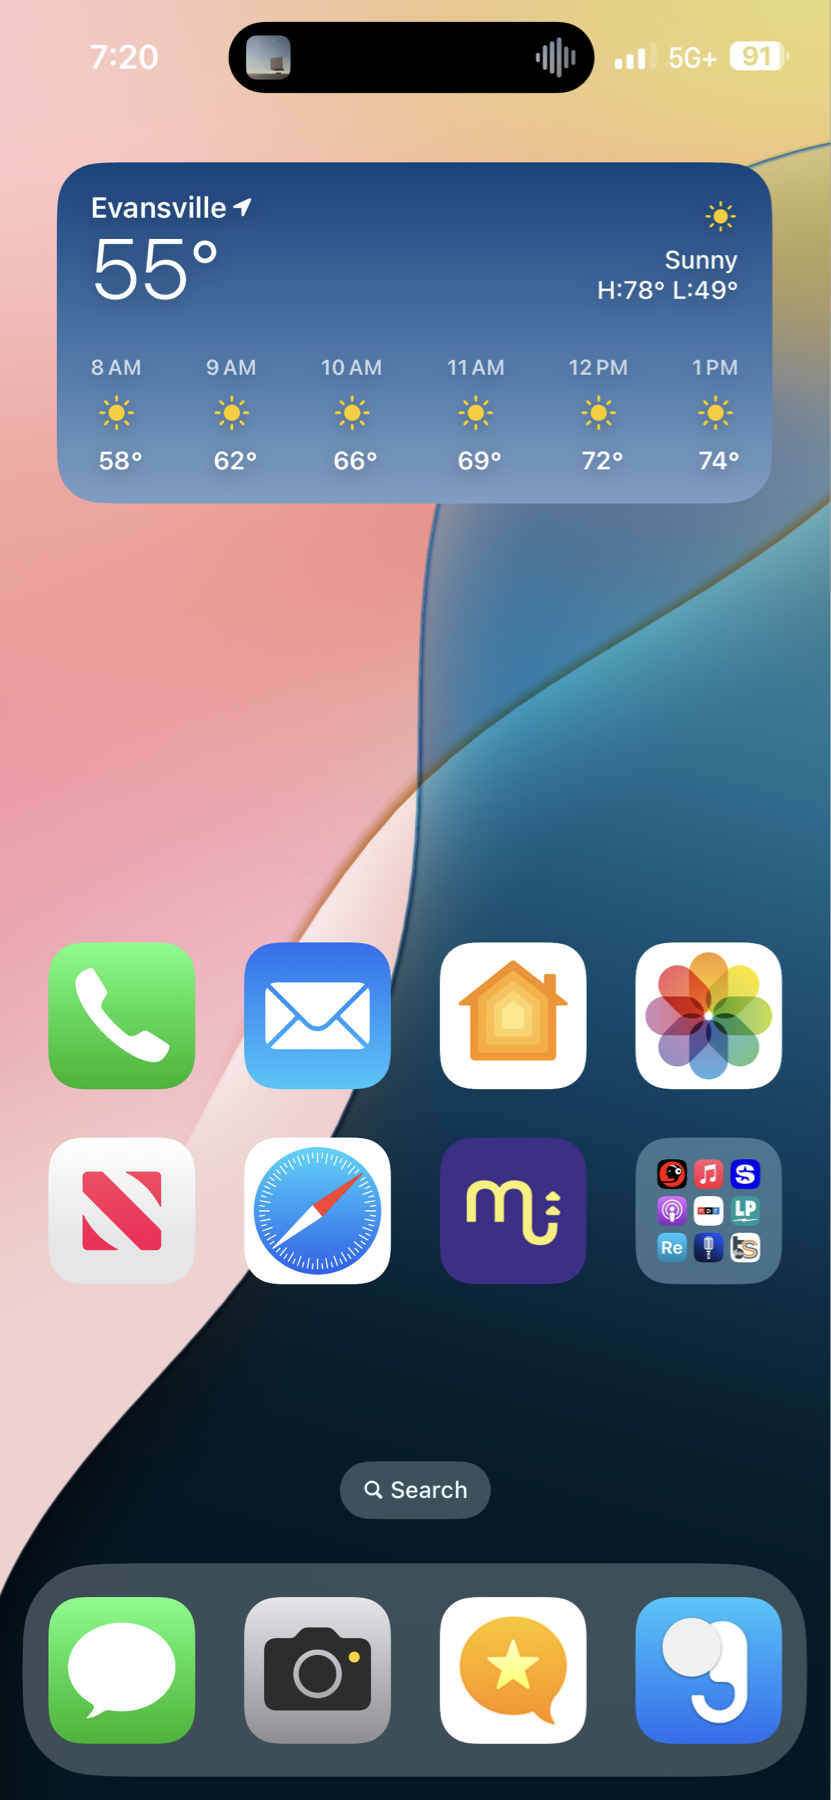 A smartphone home screen displaying time, weather, and various app icons. The time shown is 7:20, and the weather in Evansville is 55°F and sunny. App icons displayed include Phone, Mail, Home, Photos, News,